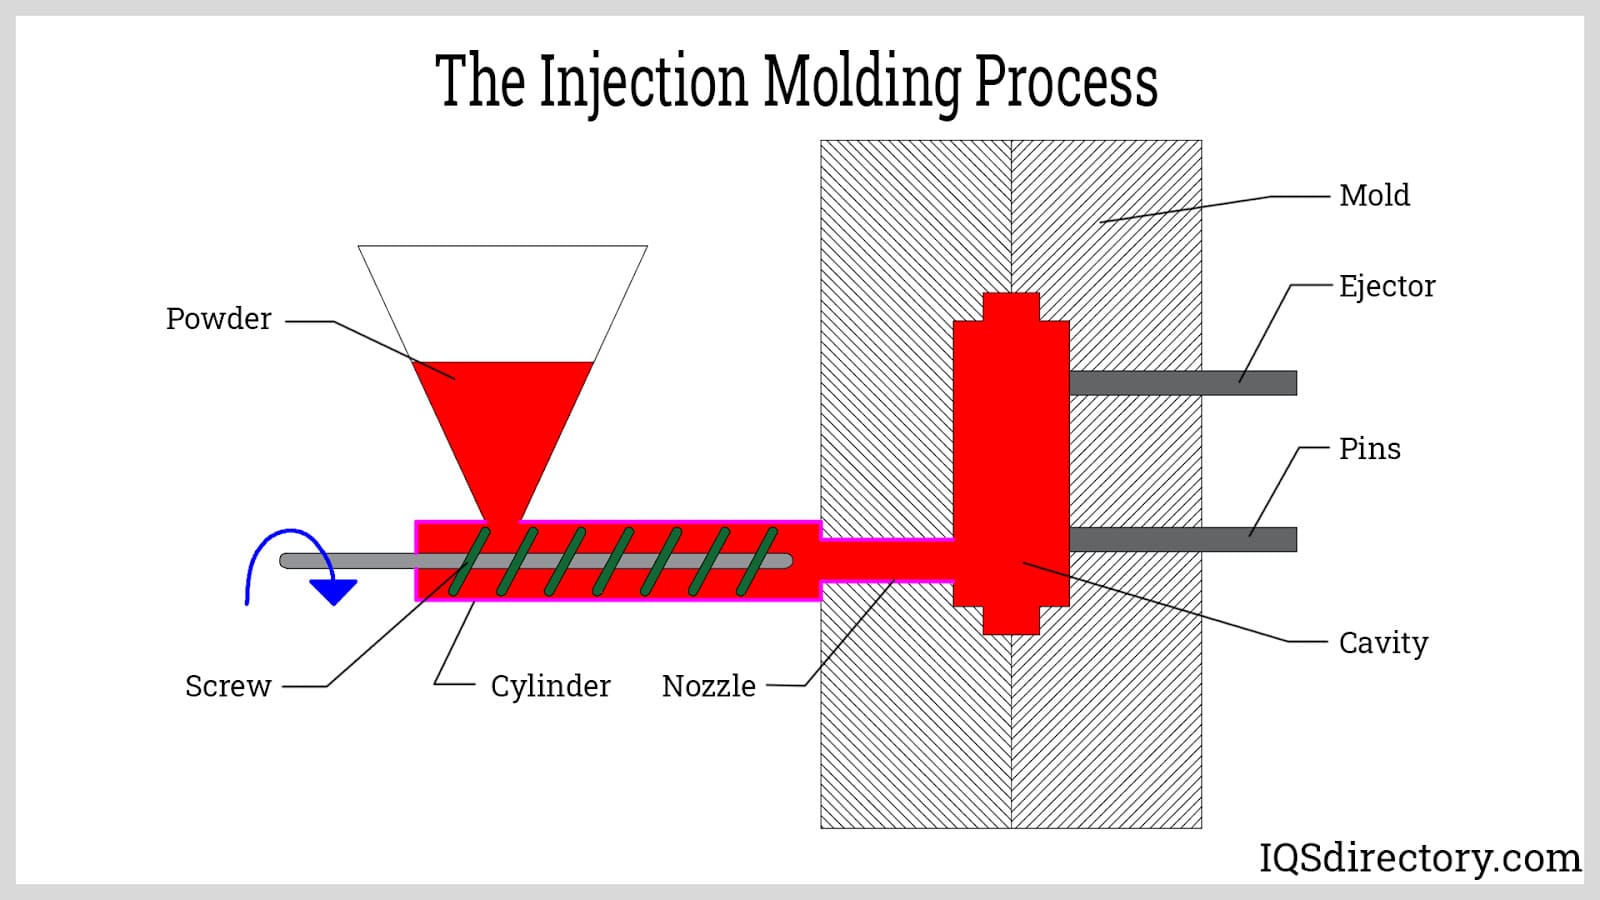 The Injection Molding Process